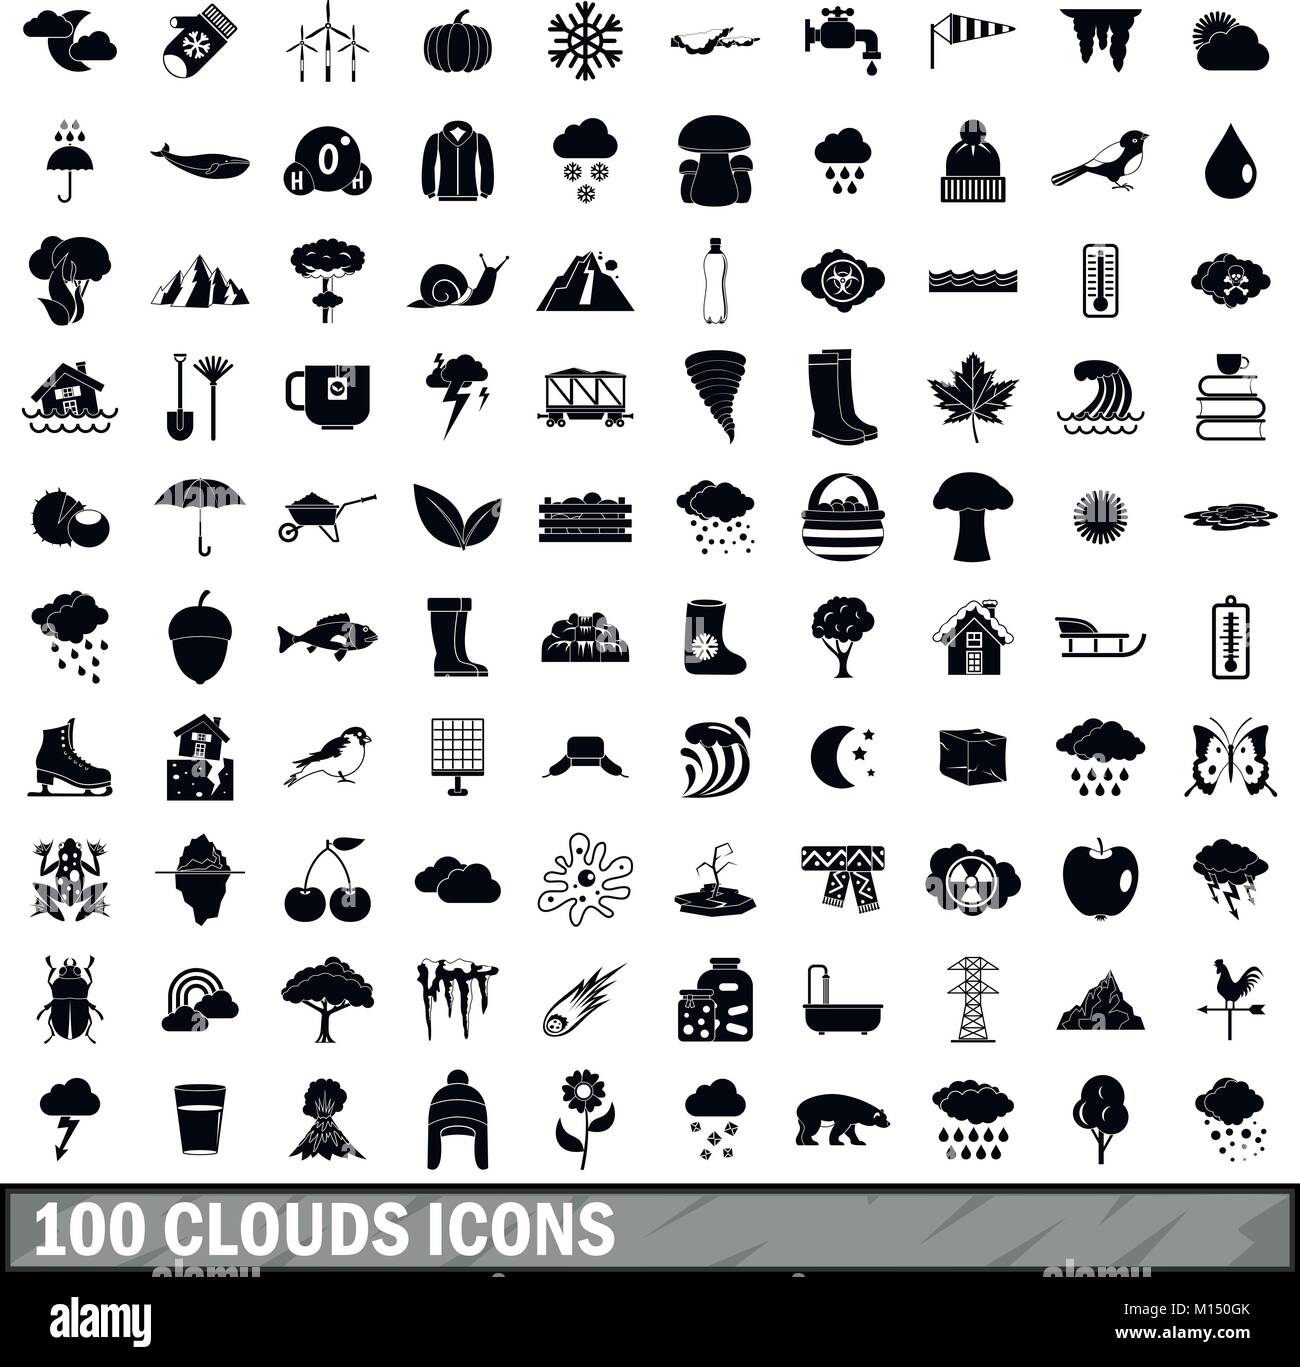 100 clouds icons set, simple style  Stock Vector